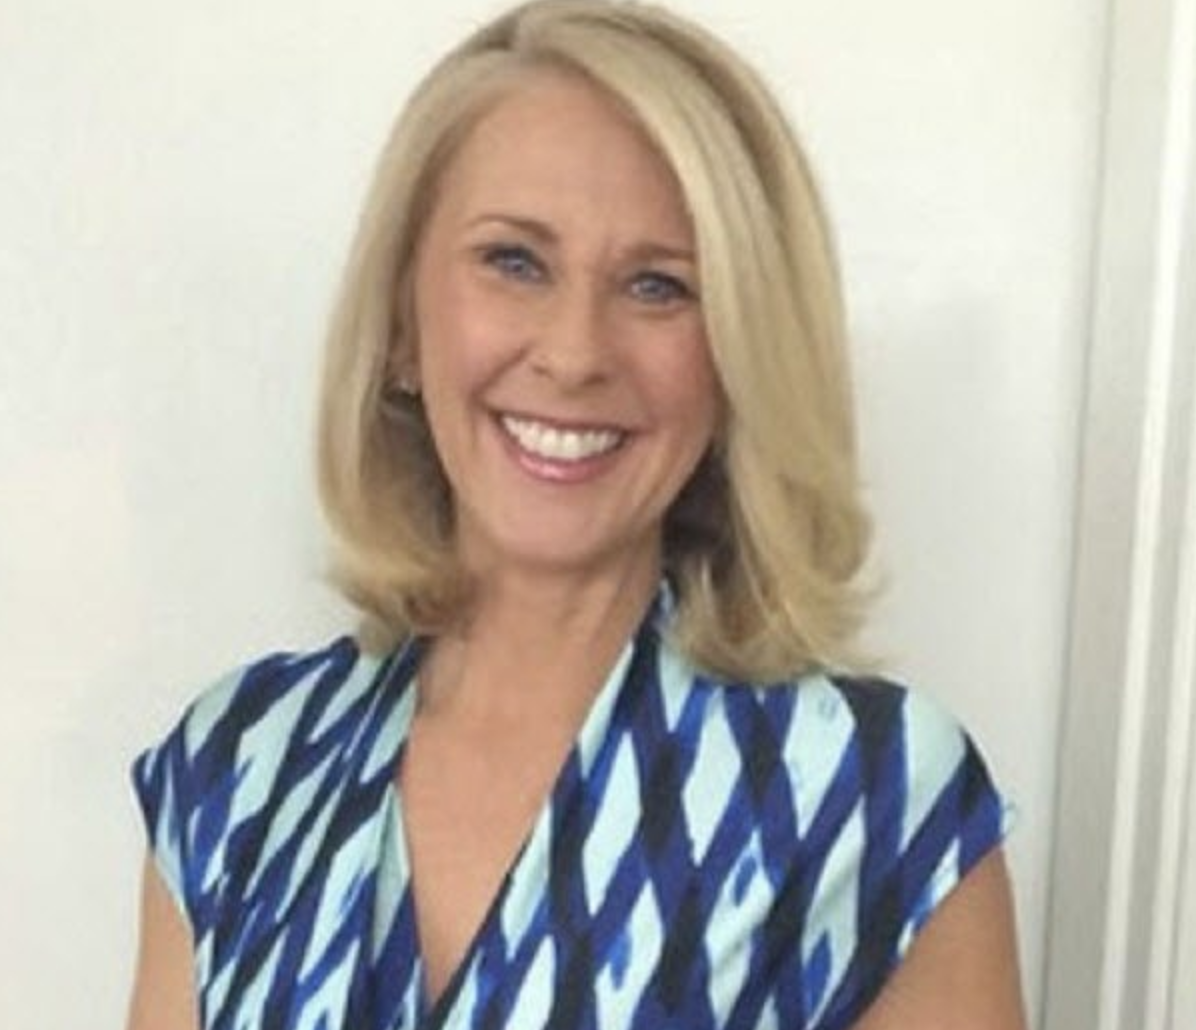 LISTEN - Tracey Spicer: “People want to see people who look like them on television"